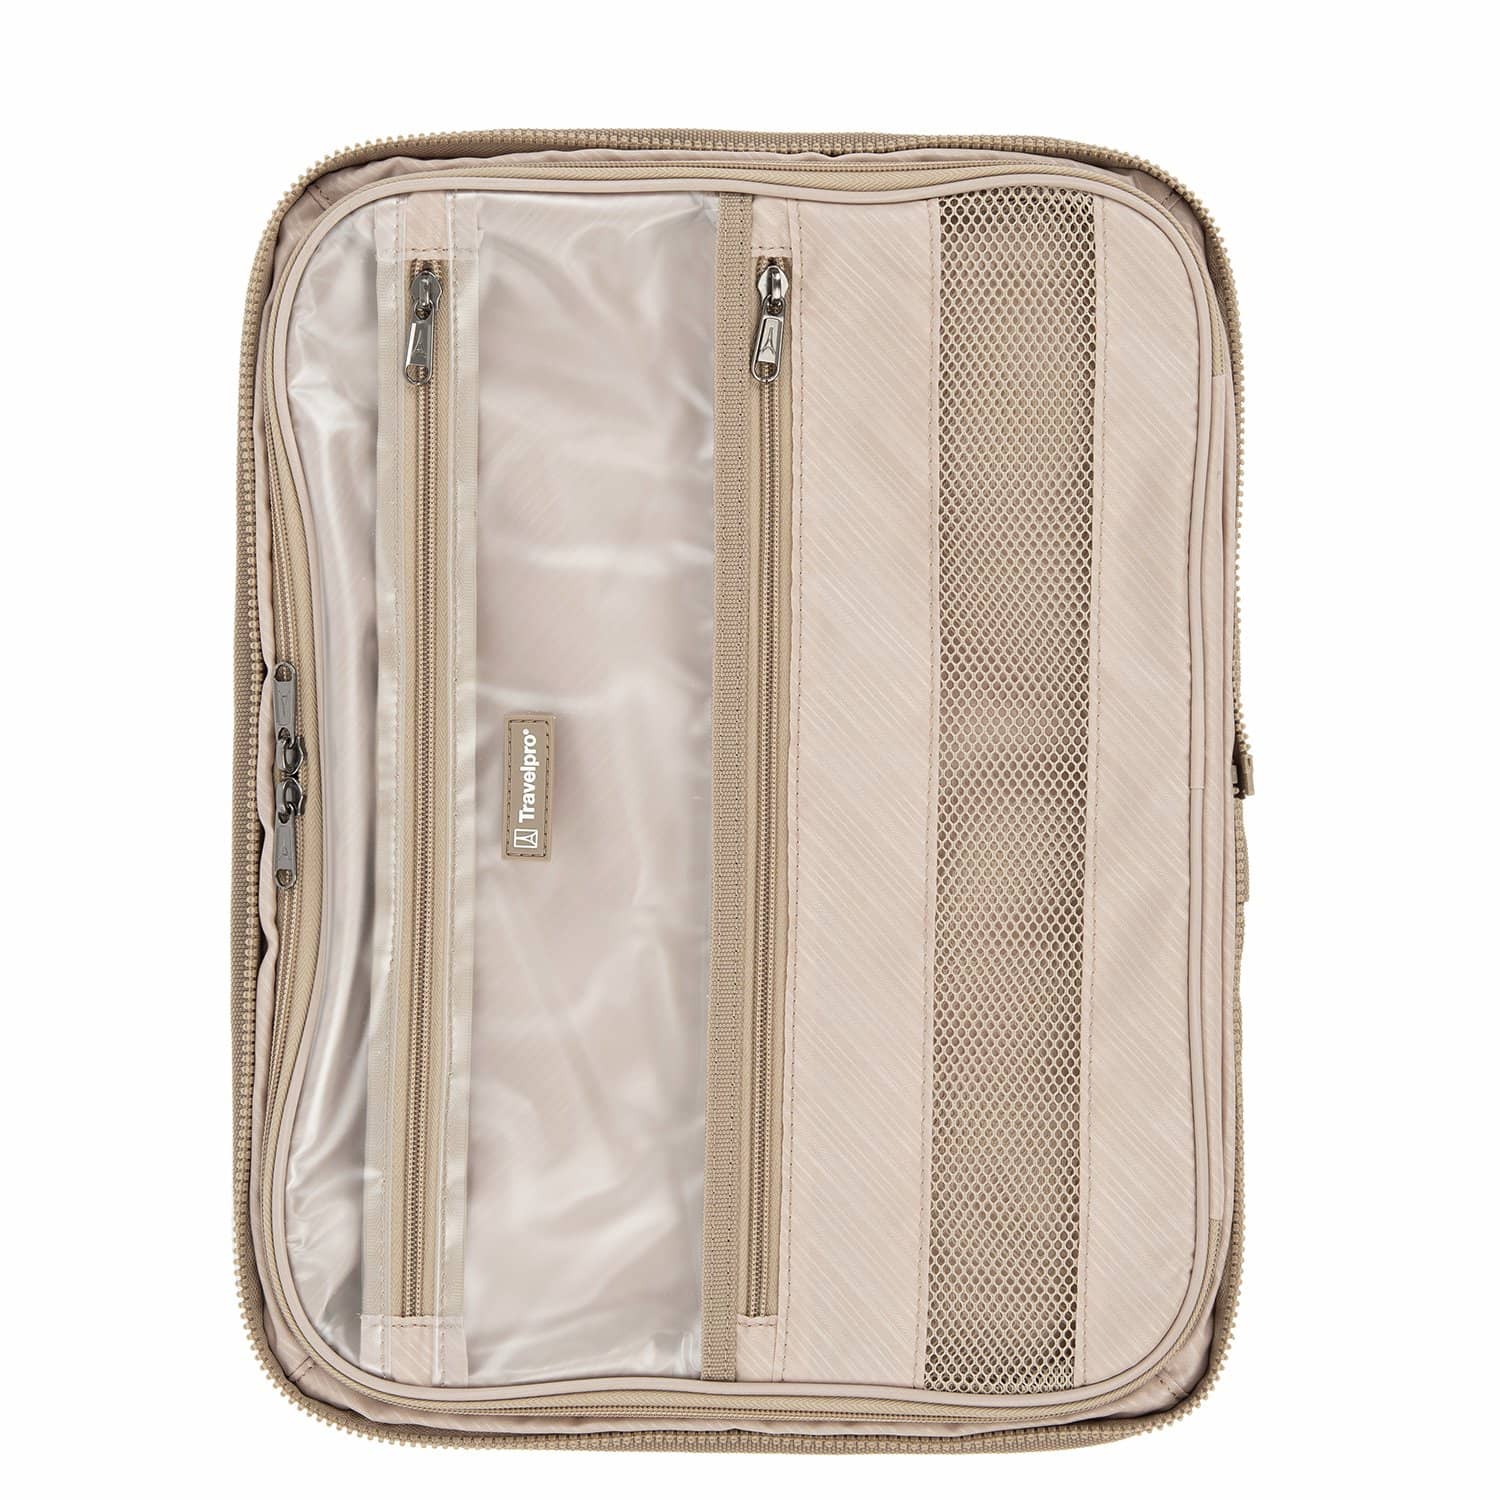 Travelpro Essentials Maxaccess Cubes Toiletry Organizer